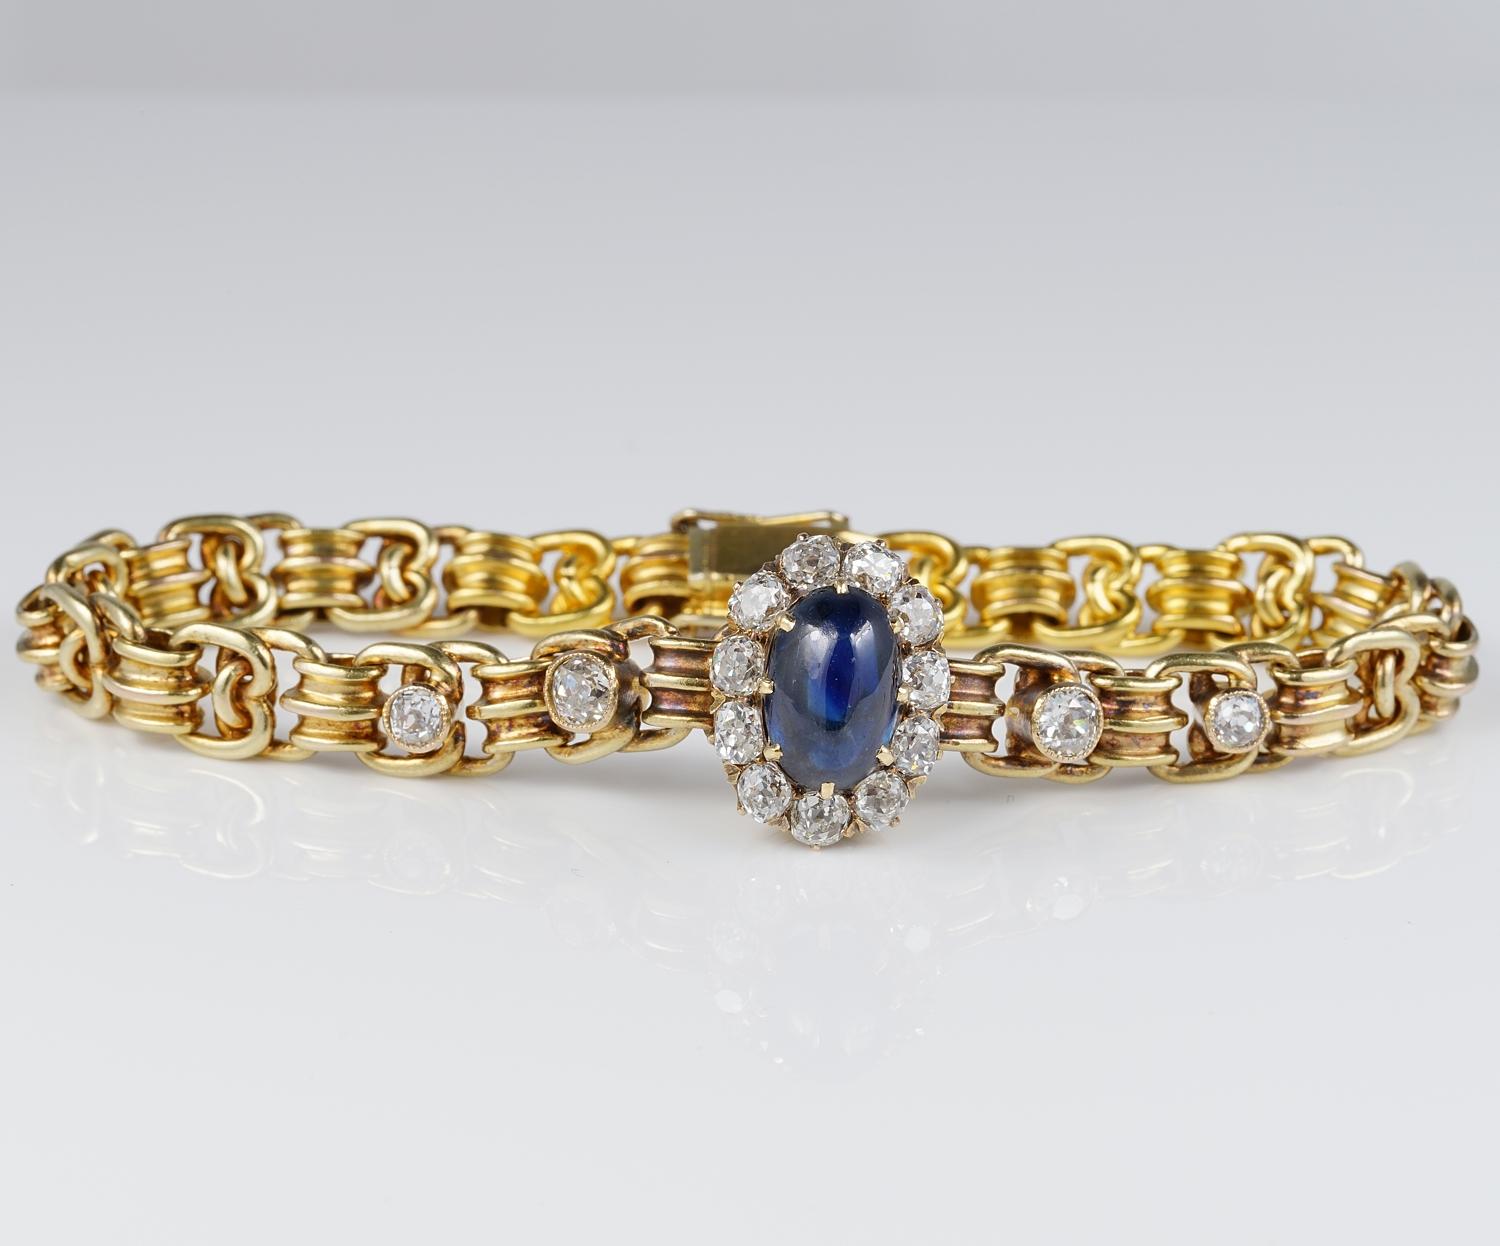 Absolutely stunning 1910 ca Russian bracelet, 14 Kt solid gold
Superlative crafting of the era, intertwined links leading to a centre cluster with rich Diamond set surrounding a rare no heat natural Blue Sapphire of dreaming blue
Bearing Russian